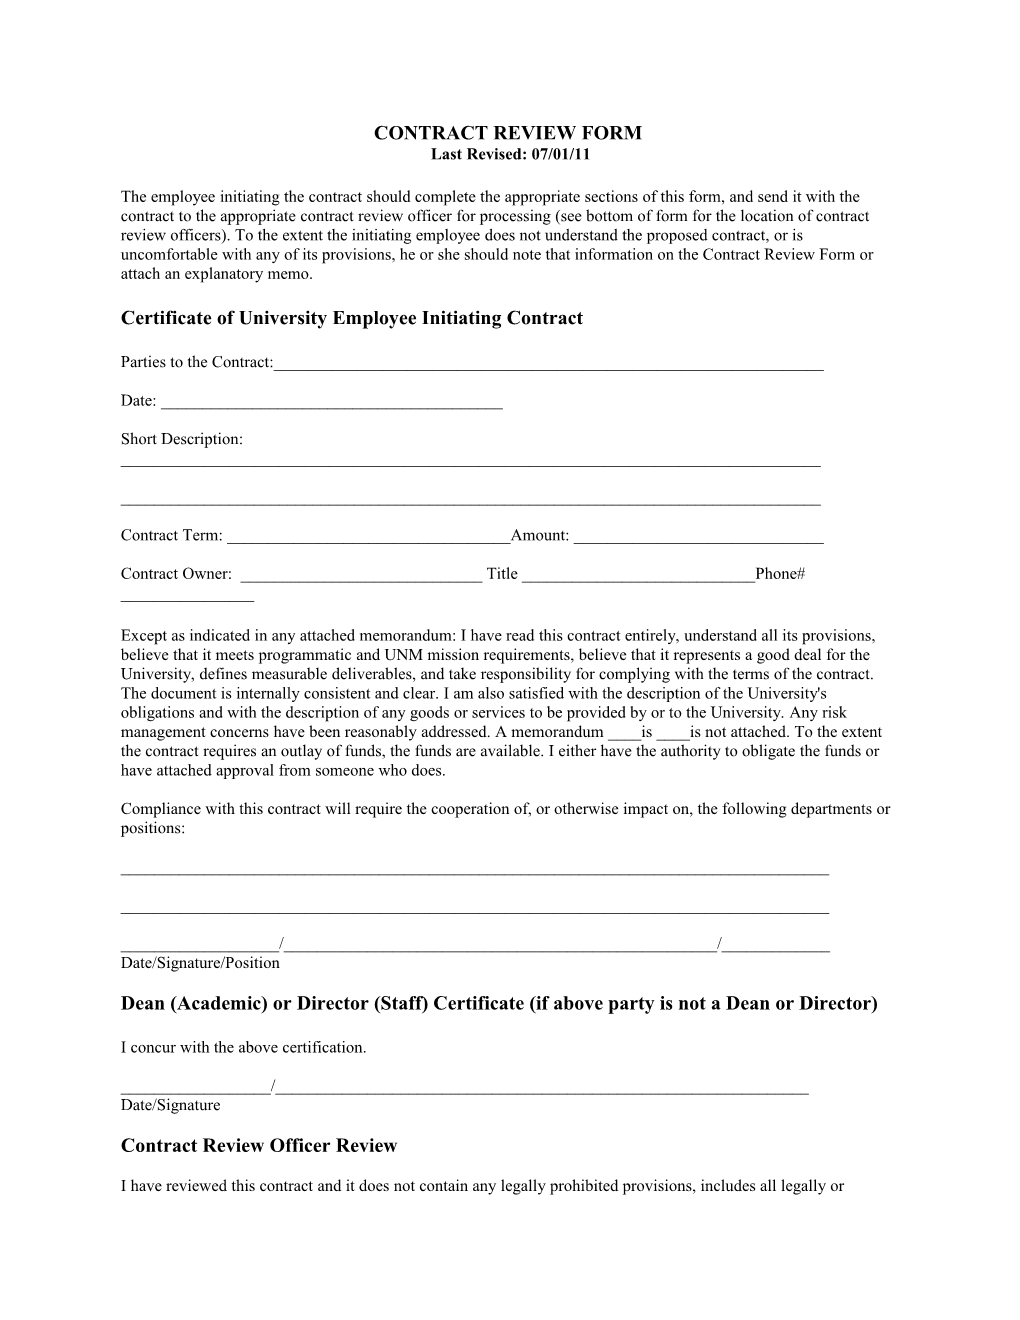 CONTRACT REVIEW FORM Last Revised: 07/01/11